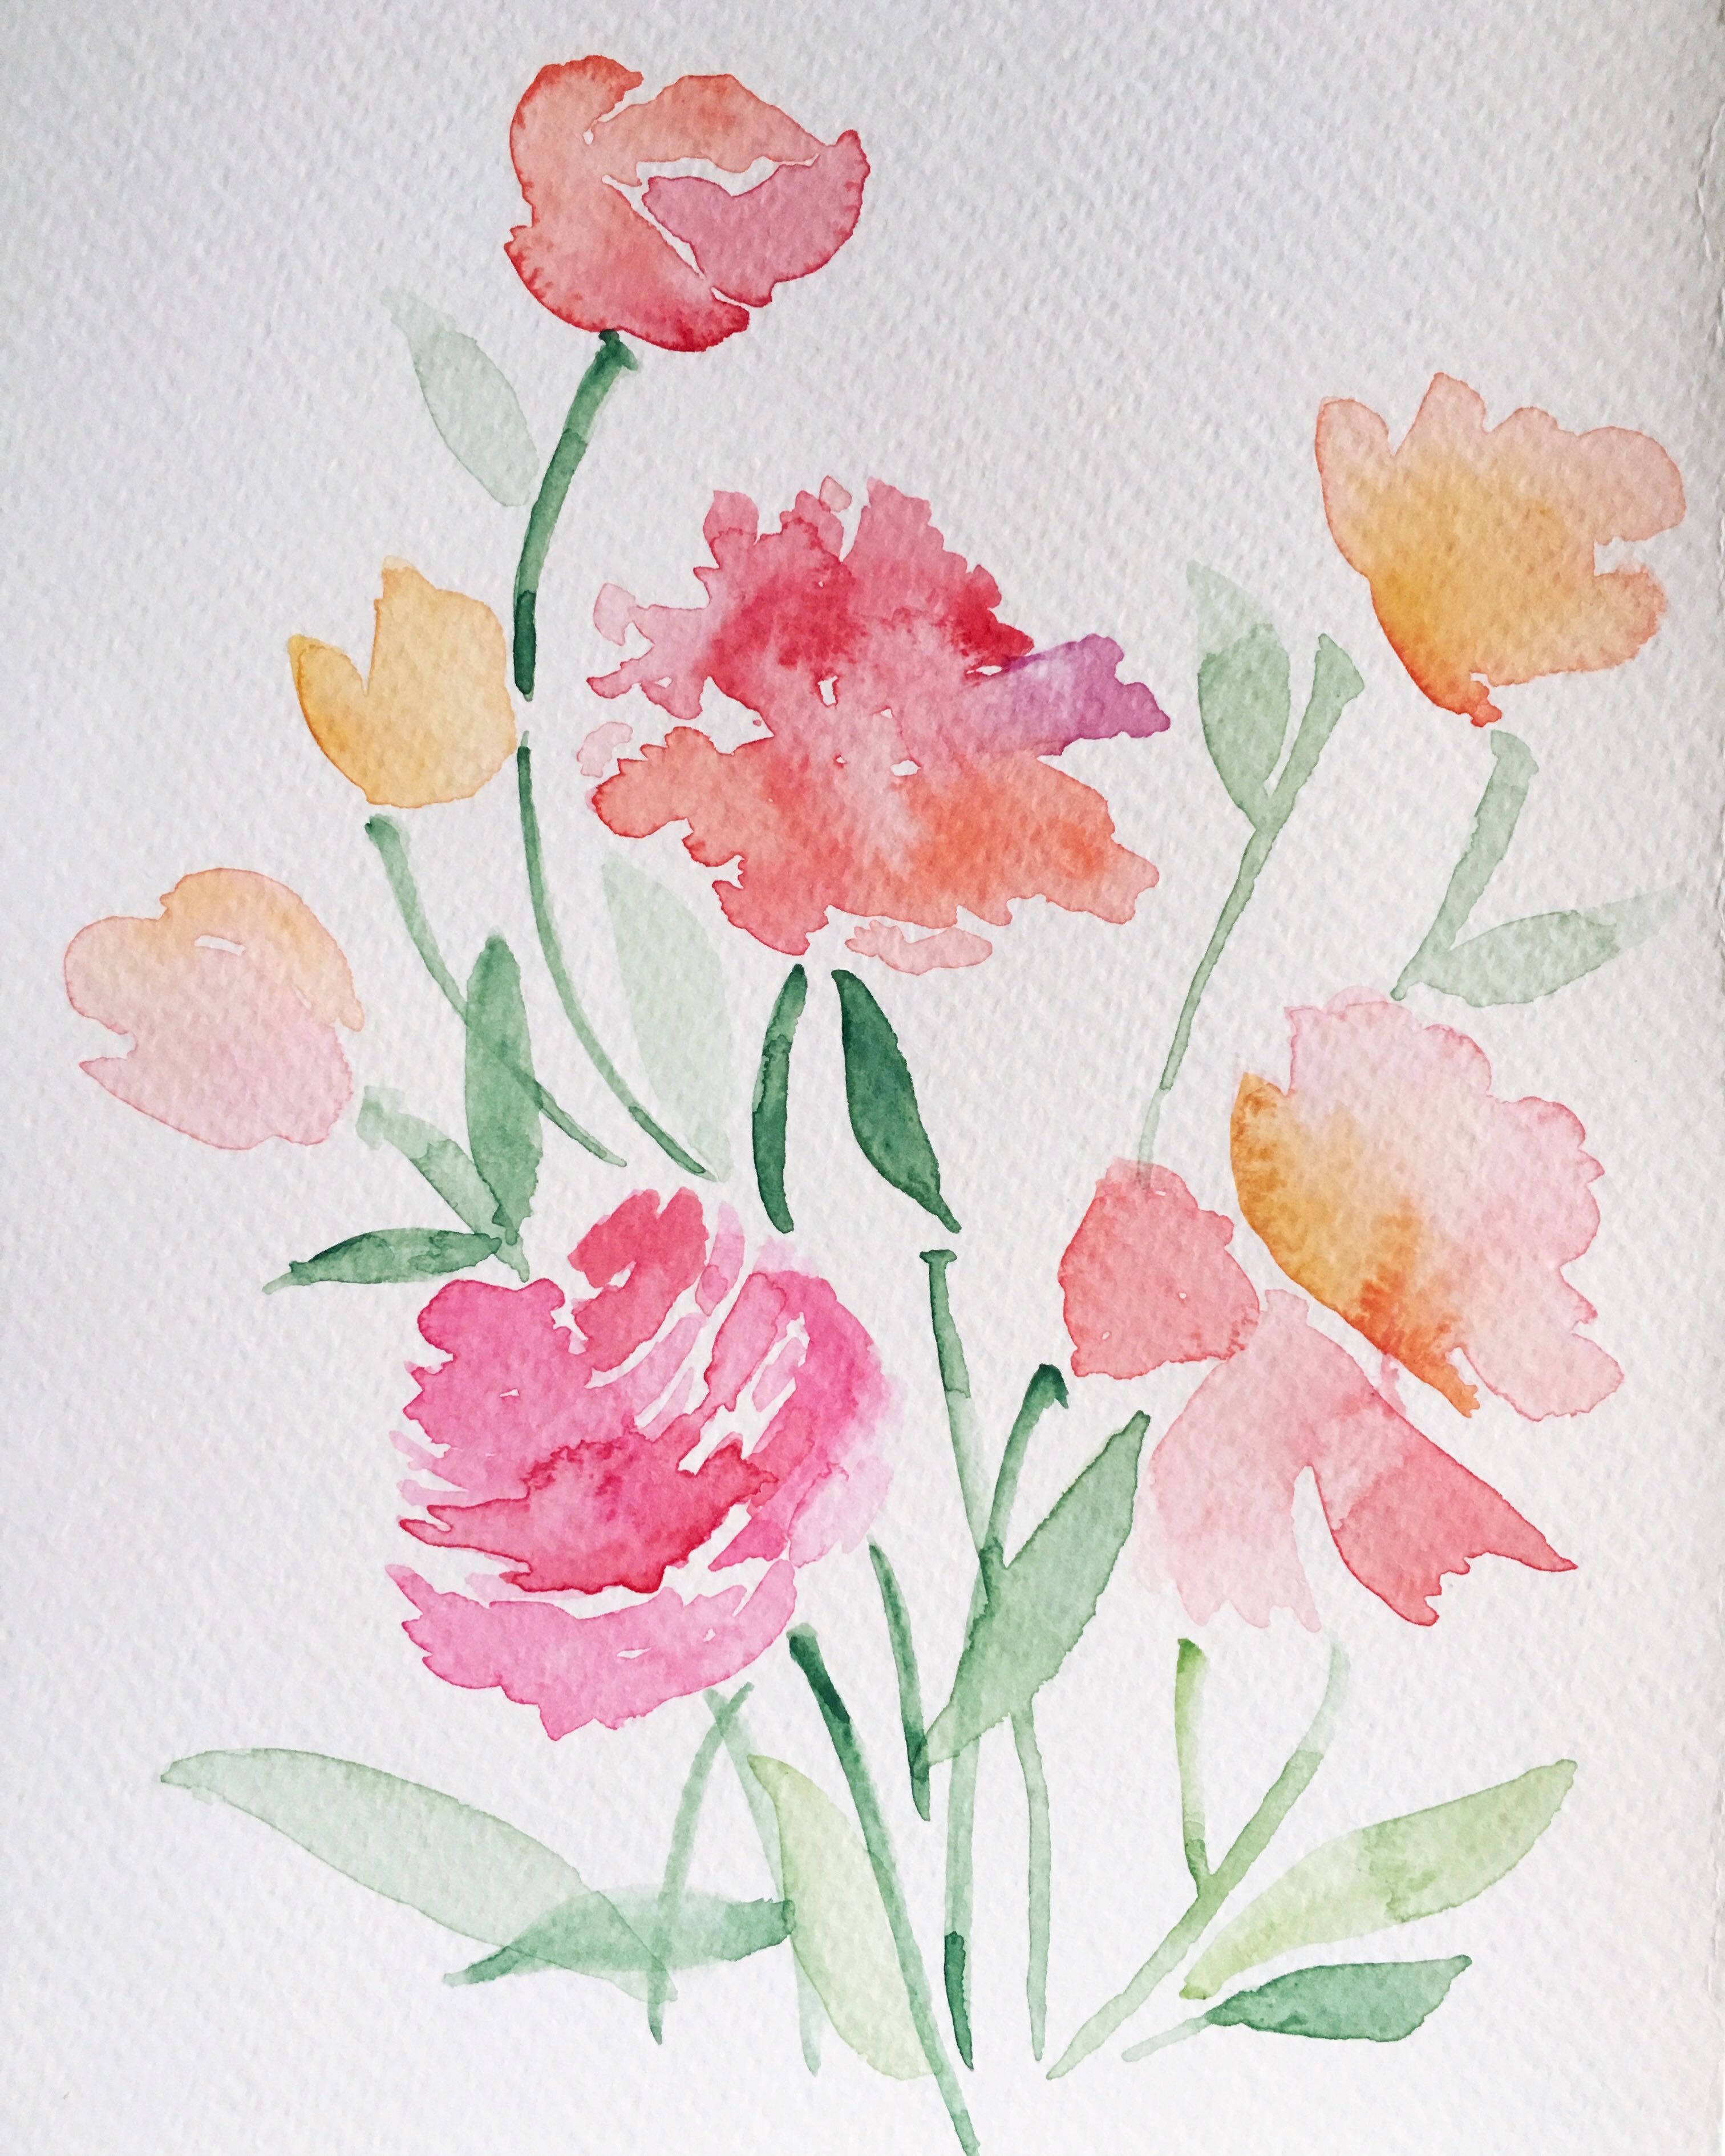 https://media.karousell.com/media/photos/products/2018/03/31/loose_floral_watercolor_painting_1522482304_2a6ab0b4.jpg